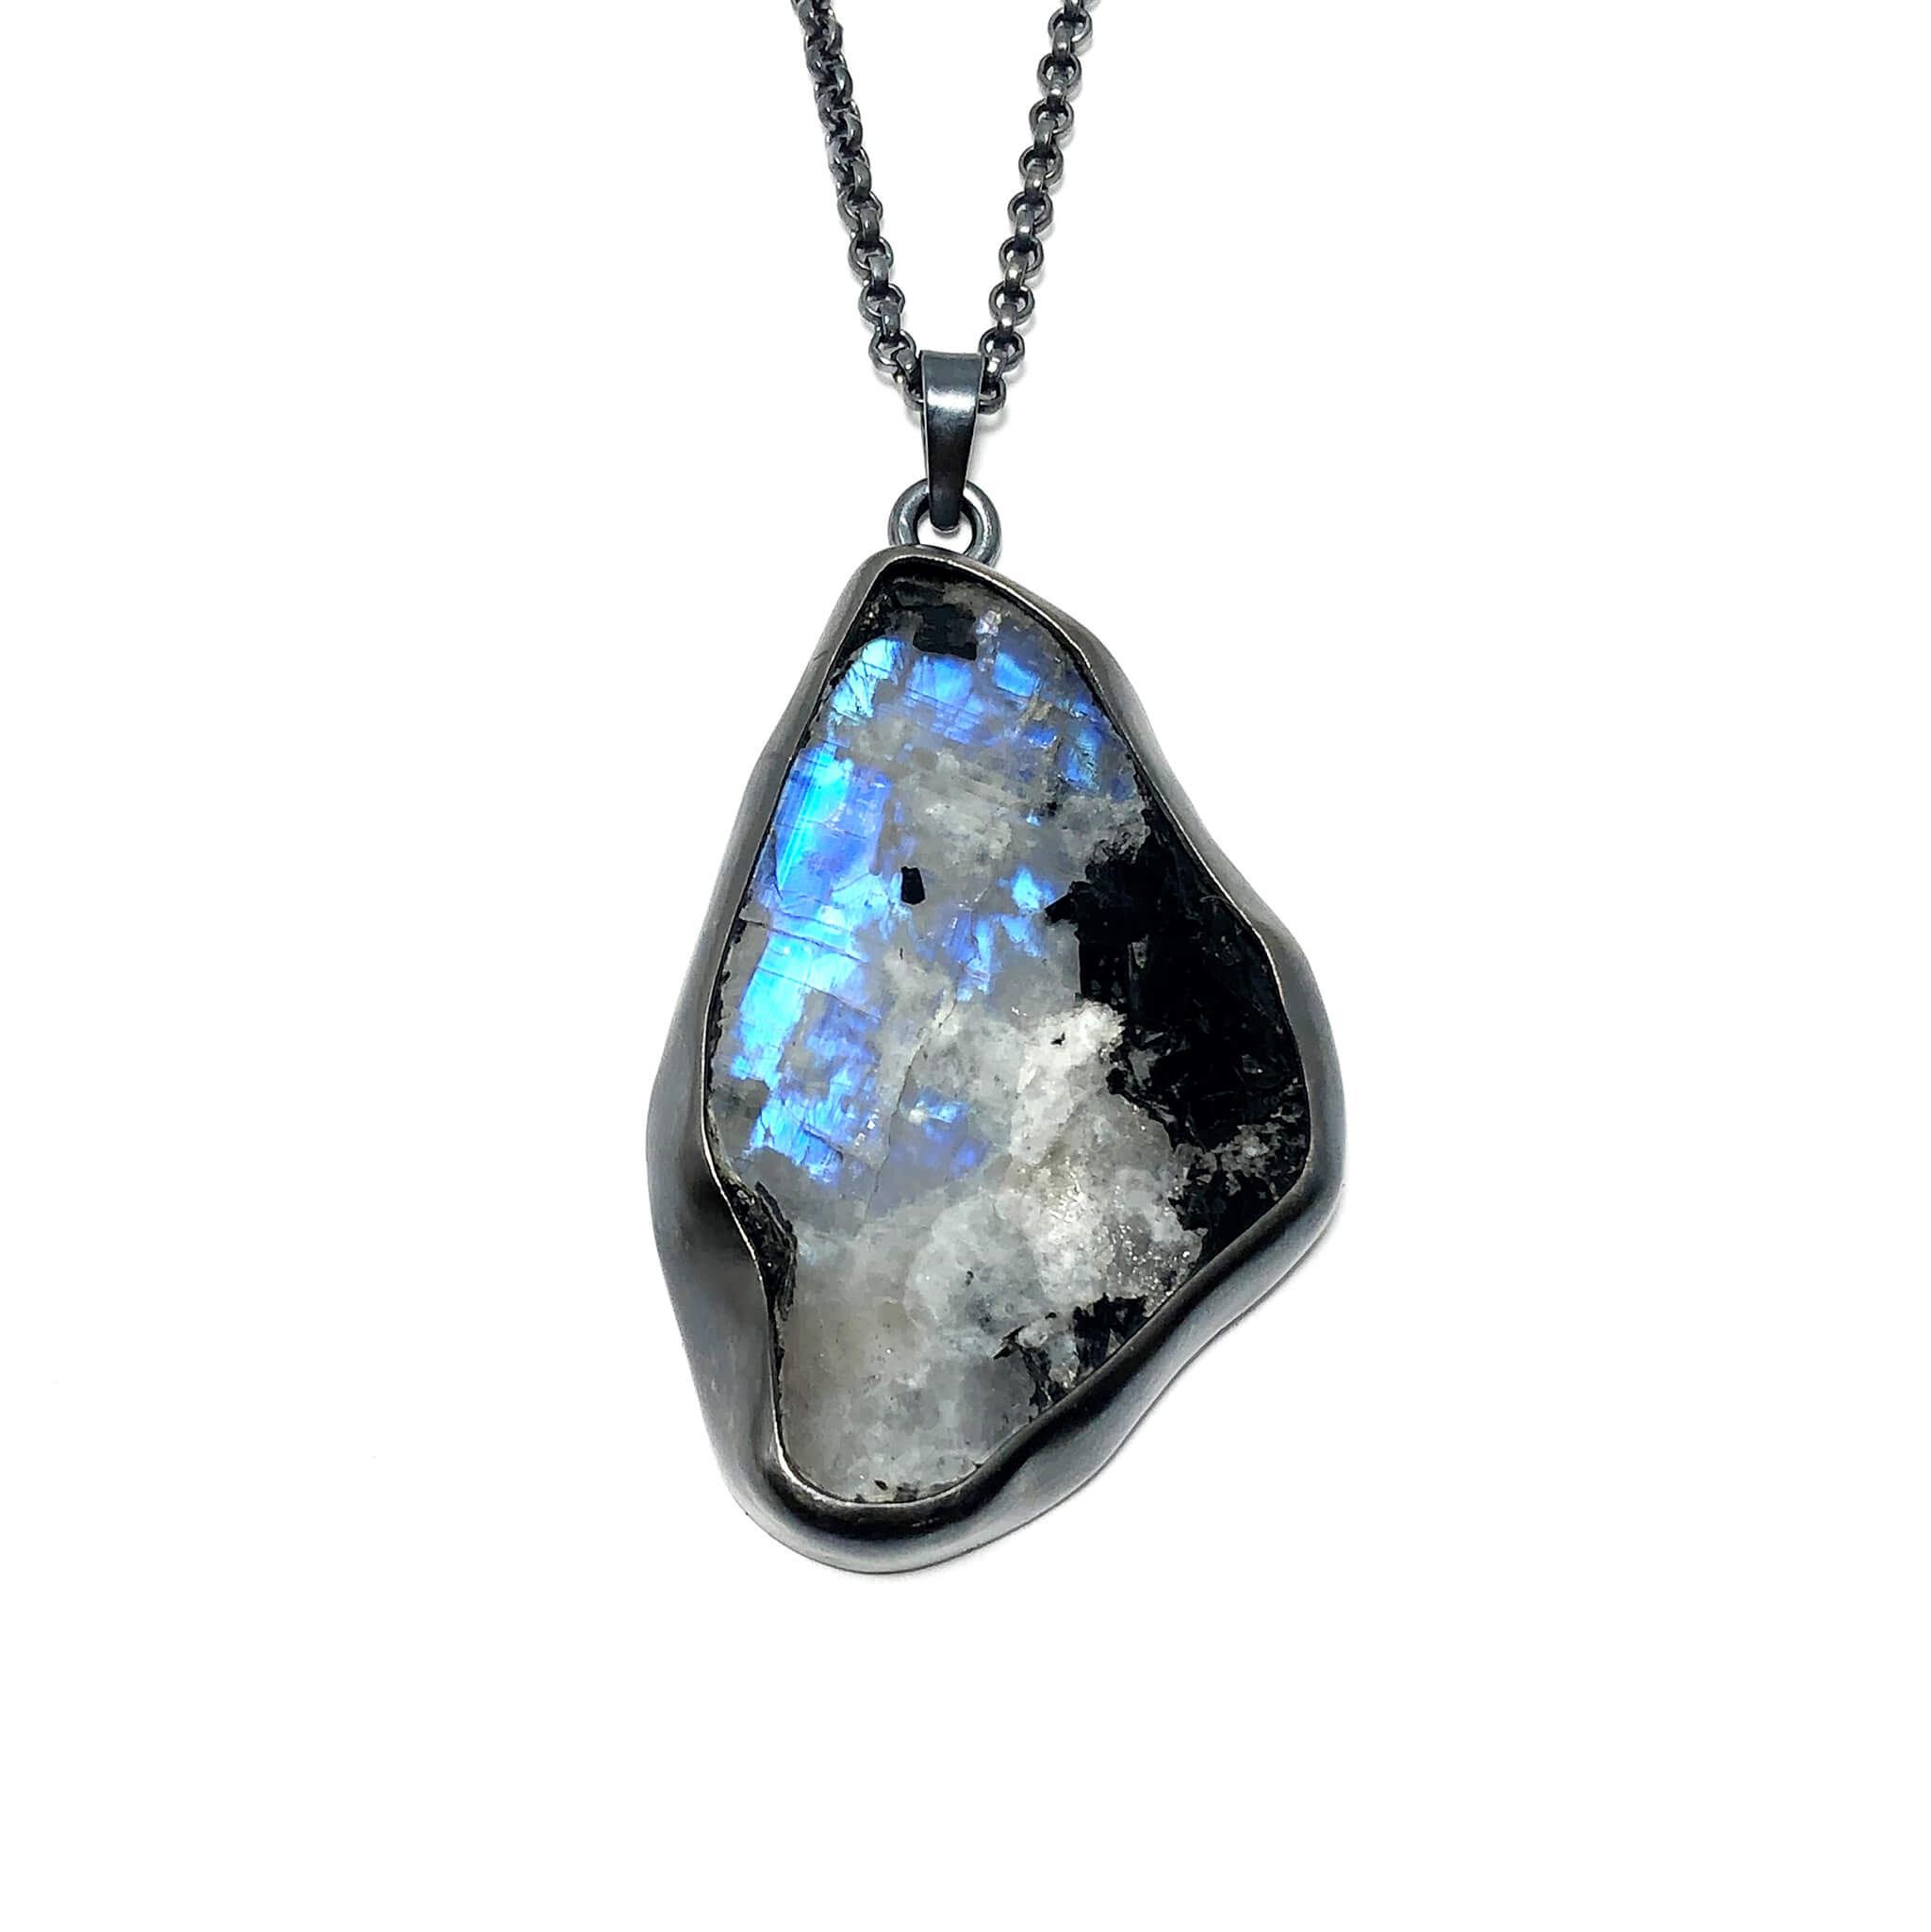 Moonstone + Black Tourmaline Talisman pendant.  Season of the Witch collection by Alex Lozier Jewelry.